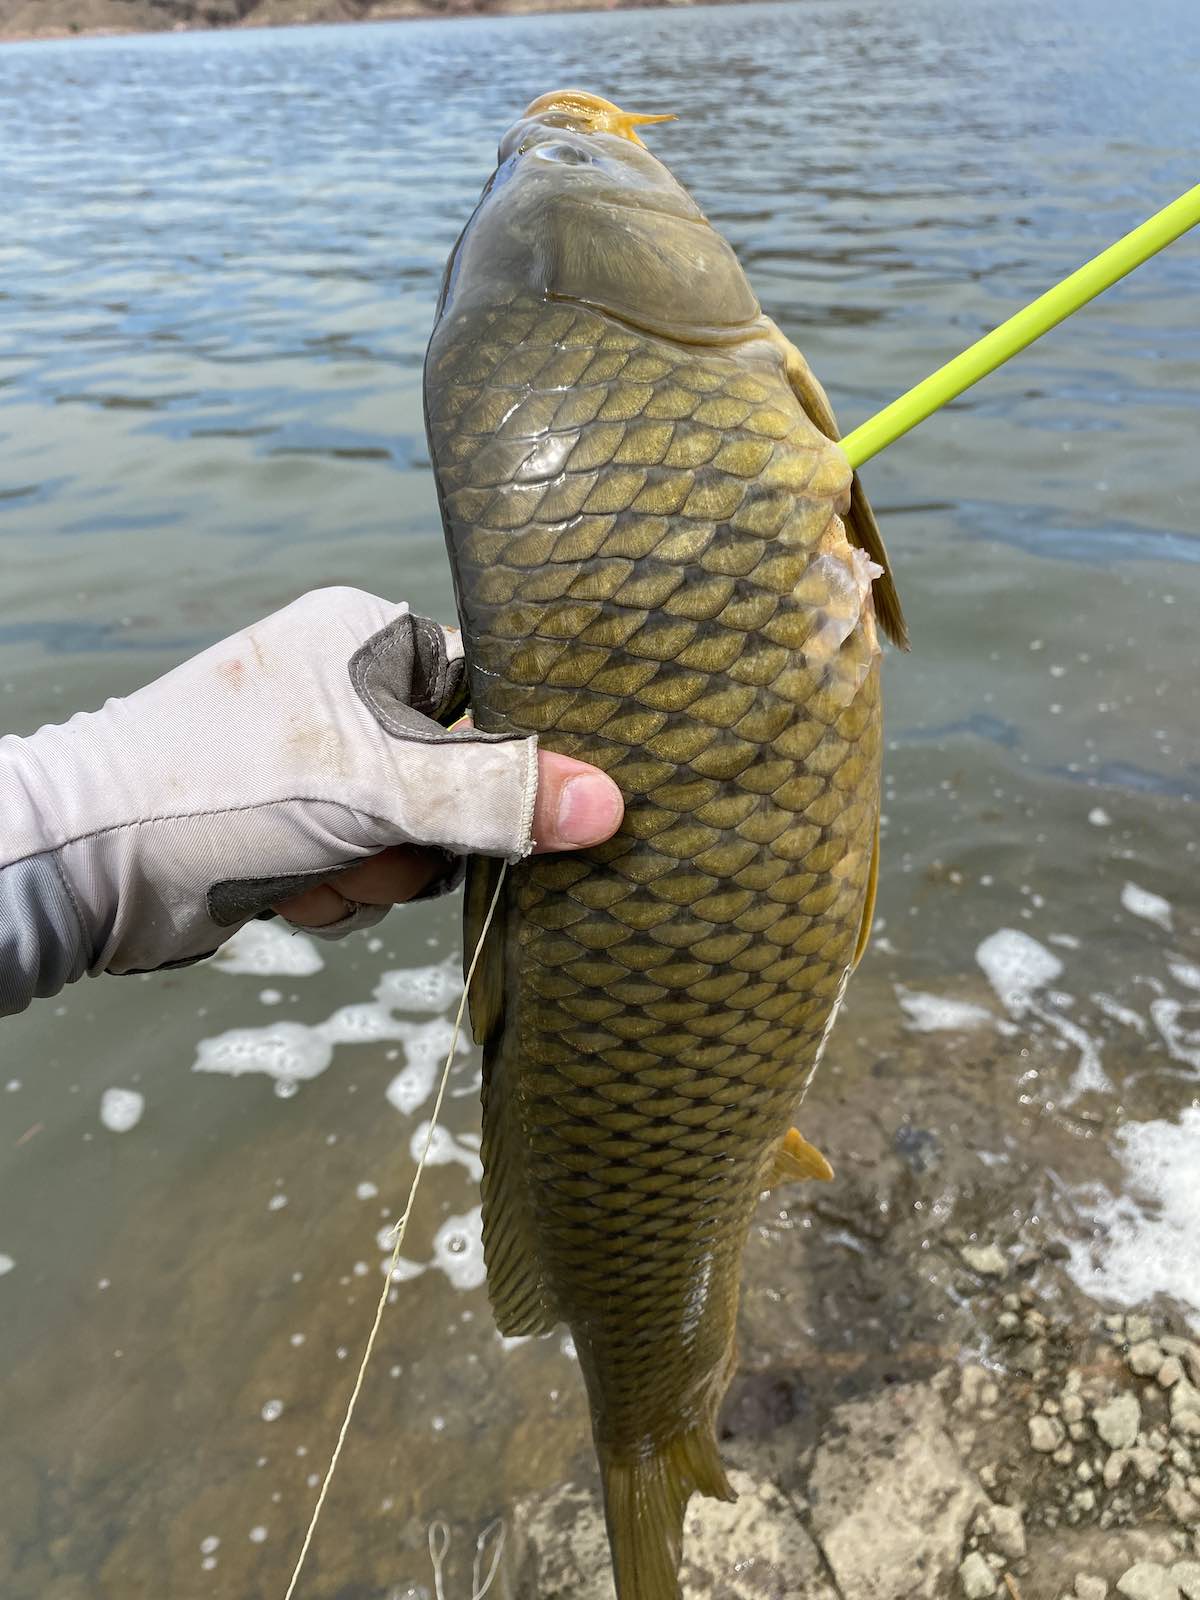 Common carp shot with bowfishing arrow in reservoir